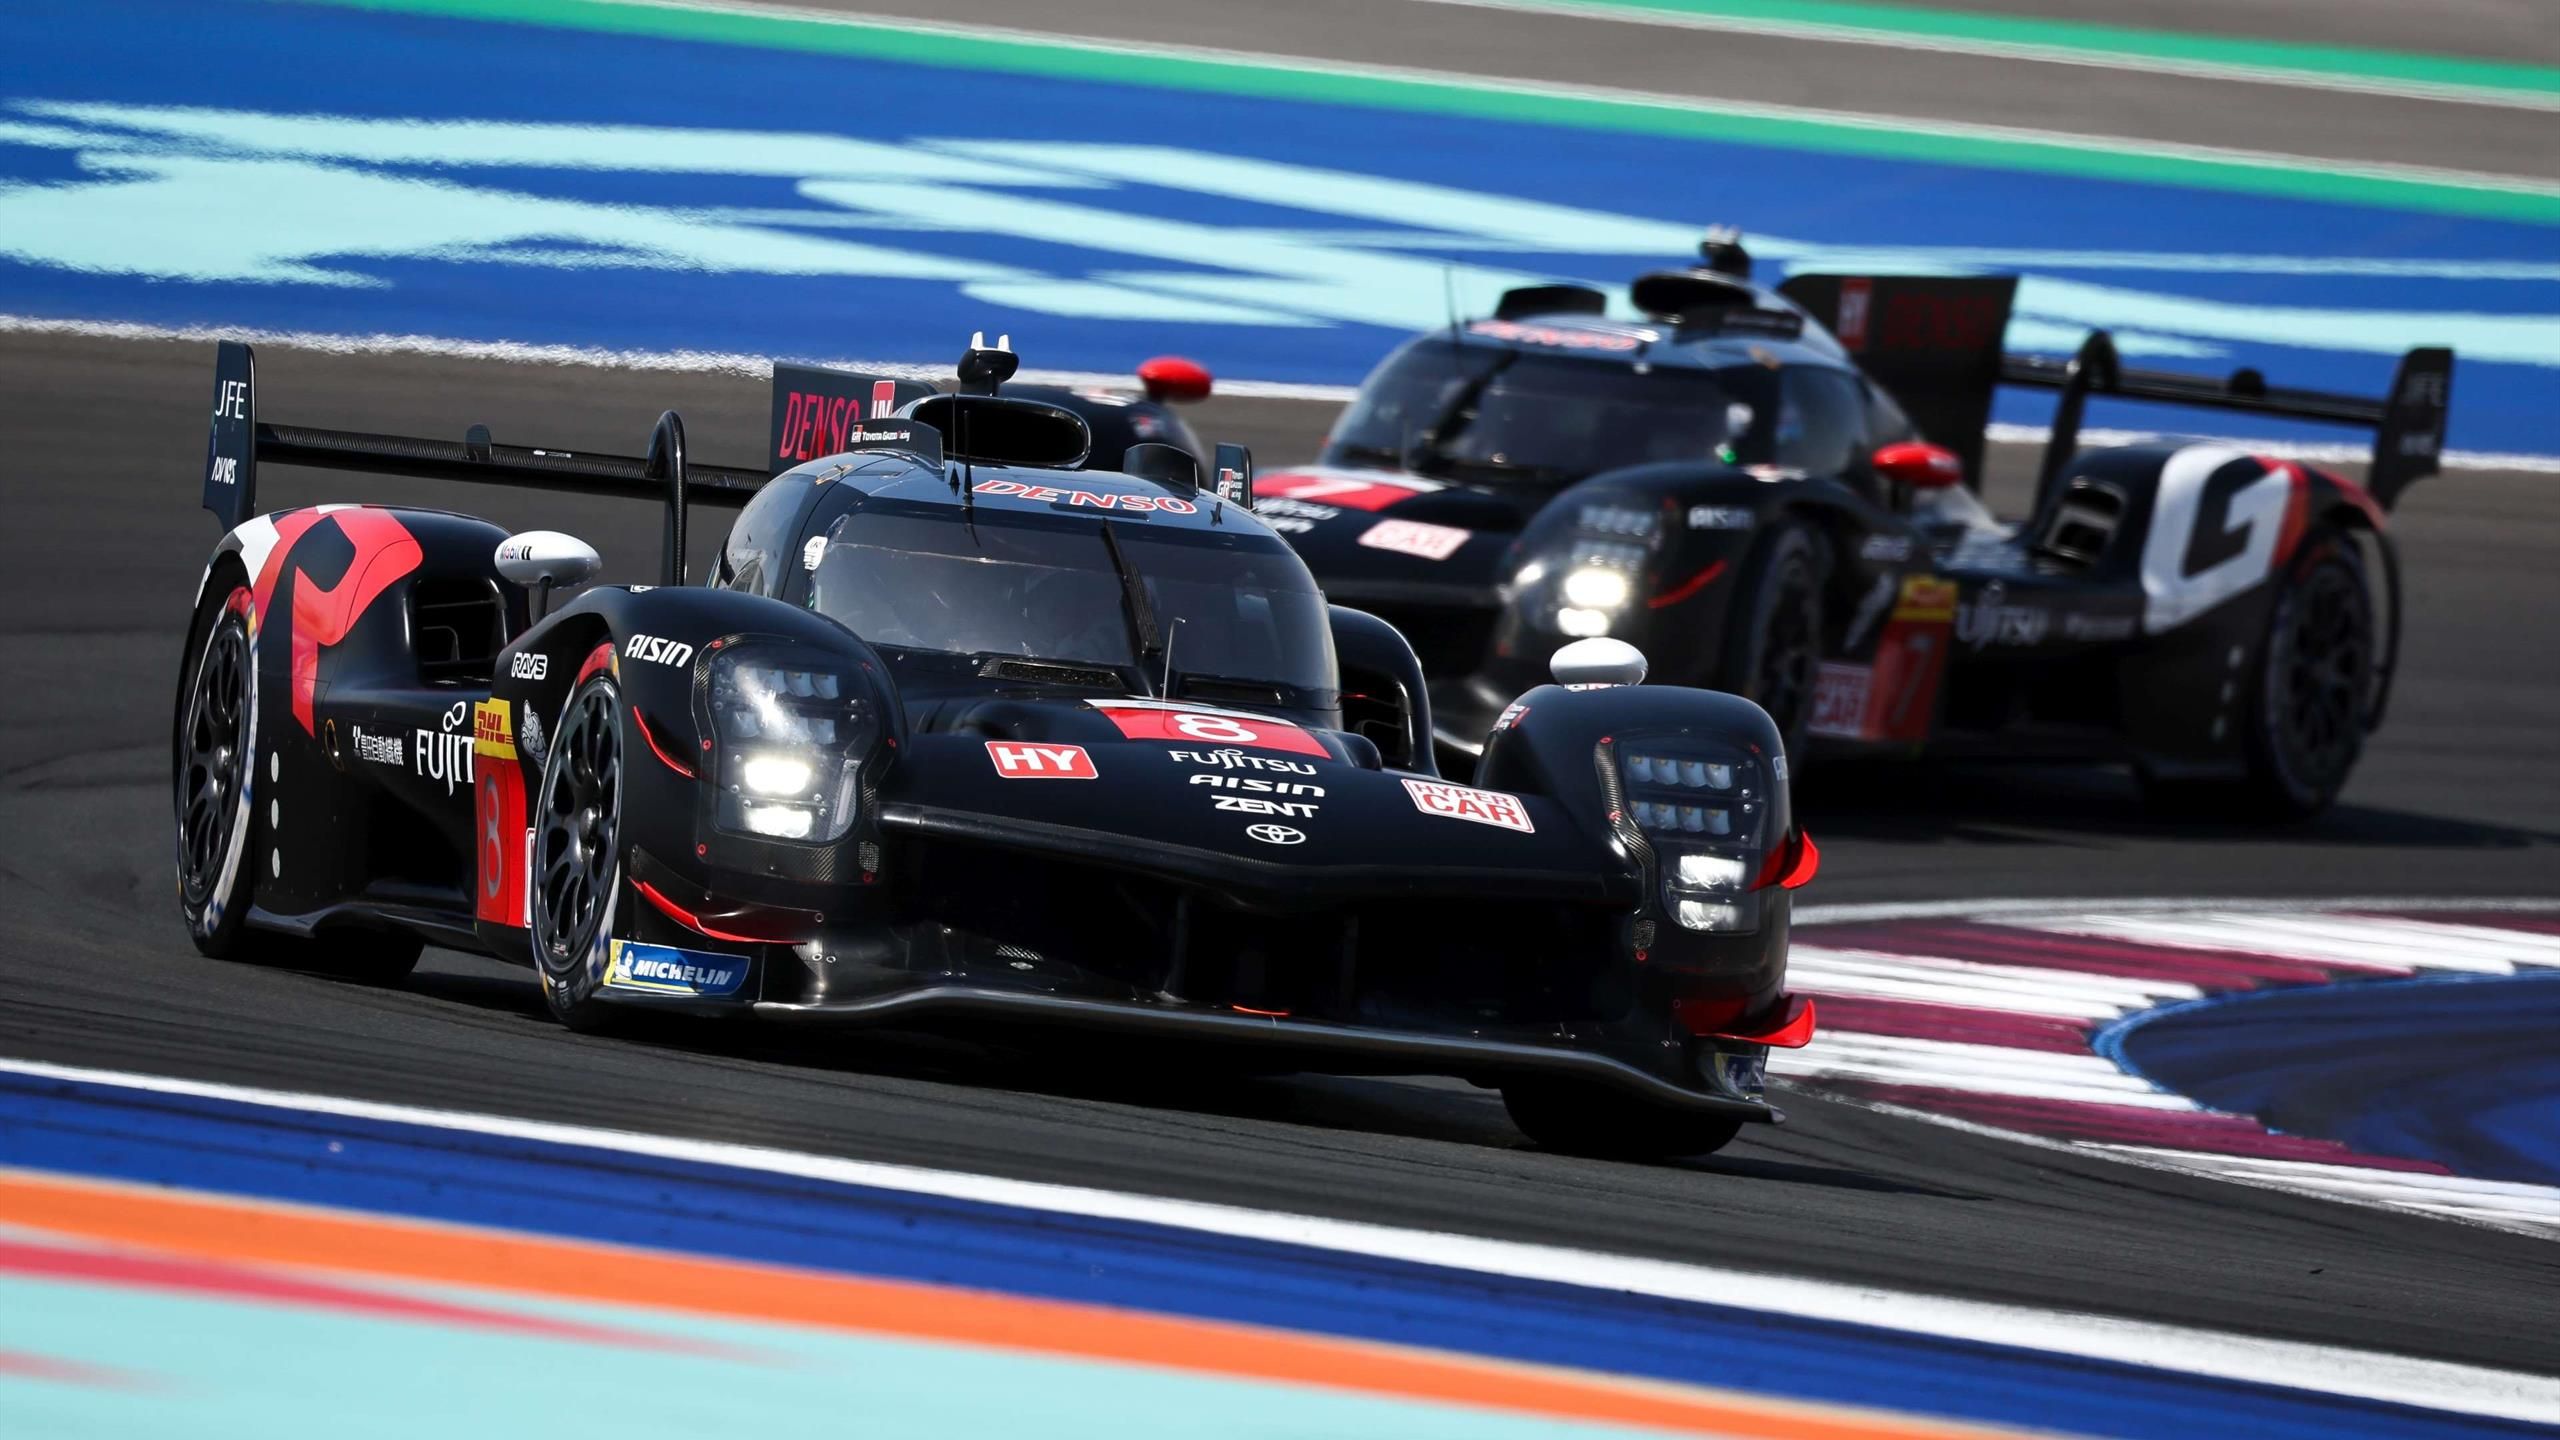 Toyota was surprised by sixth place, and does not expect an easy race at Imola either